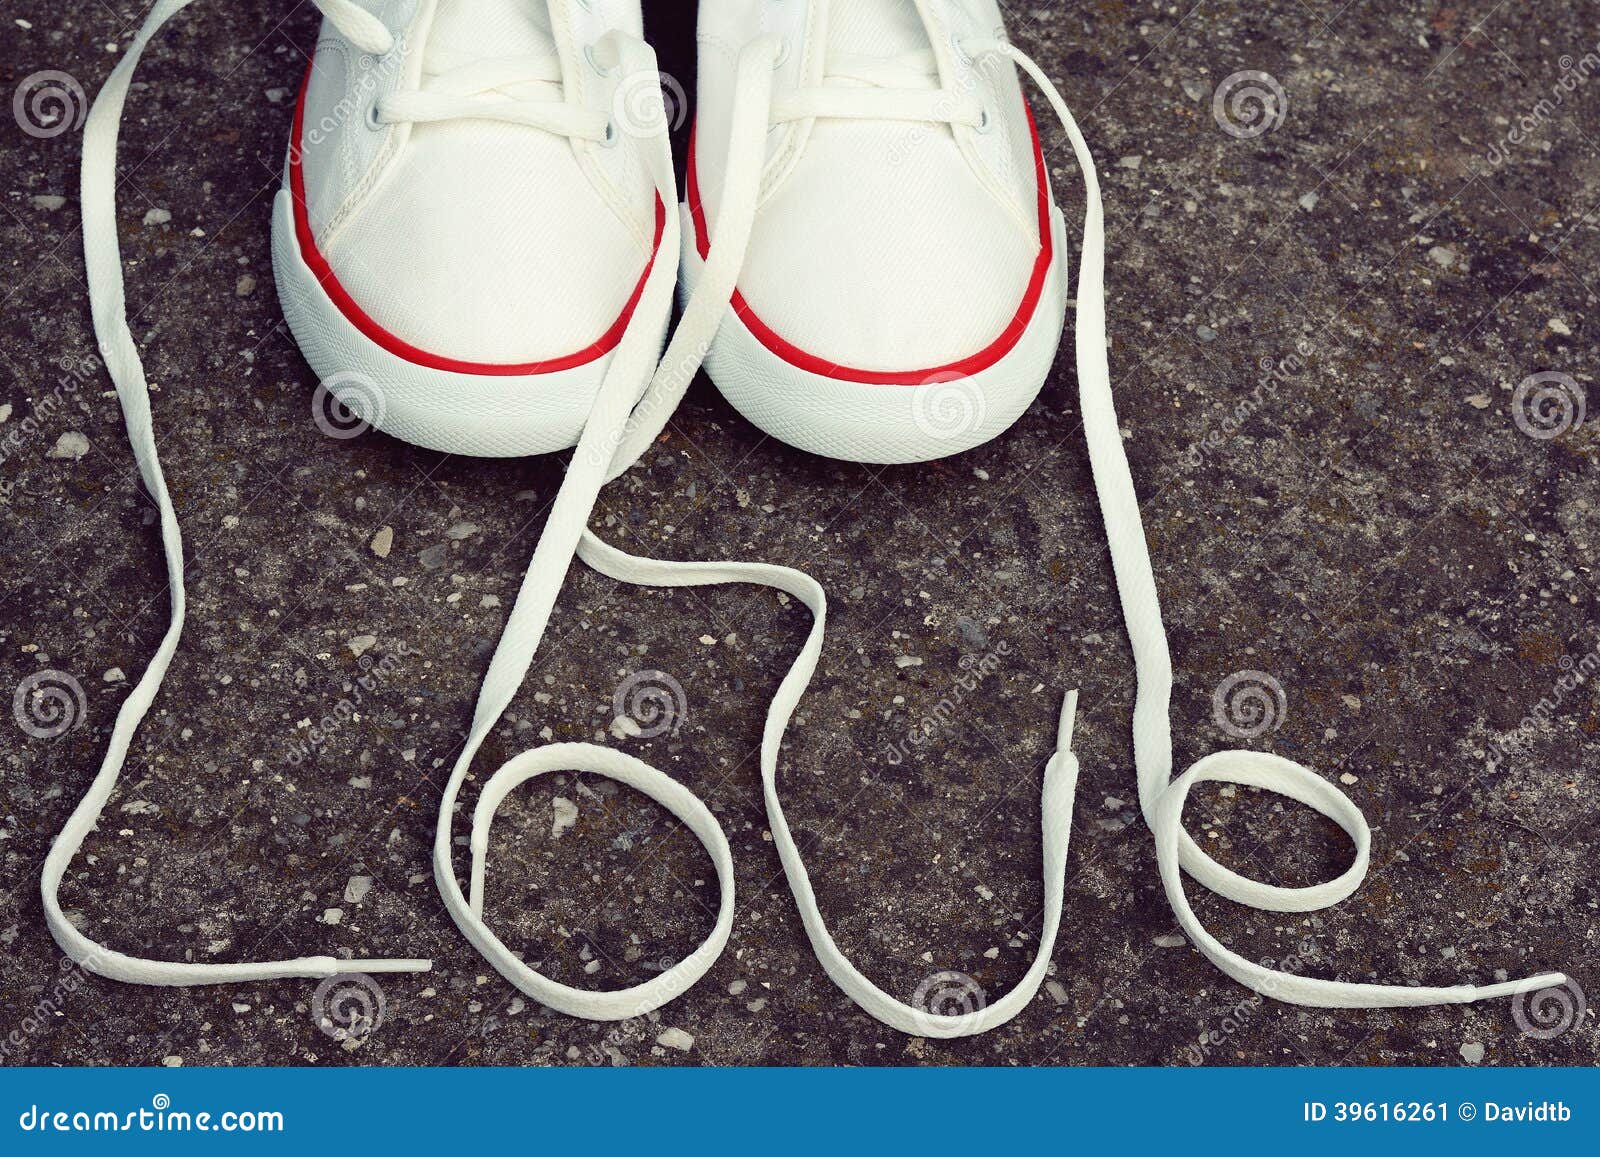 Love shoes stock image. Image of idea, love, concept - 39616261